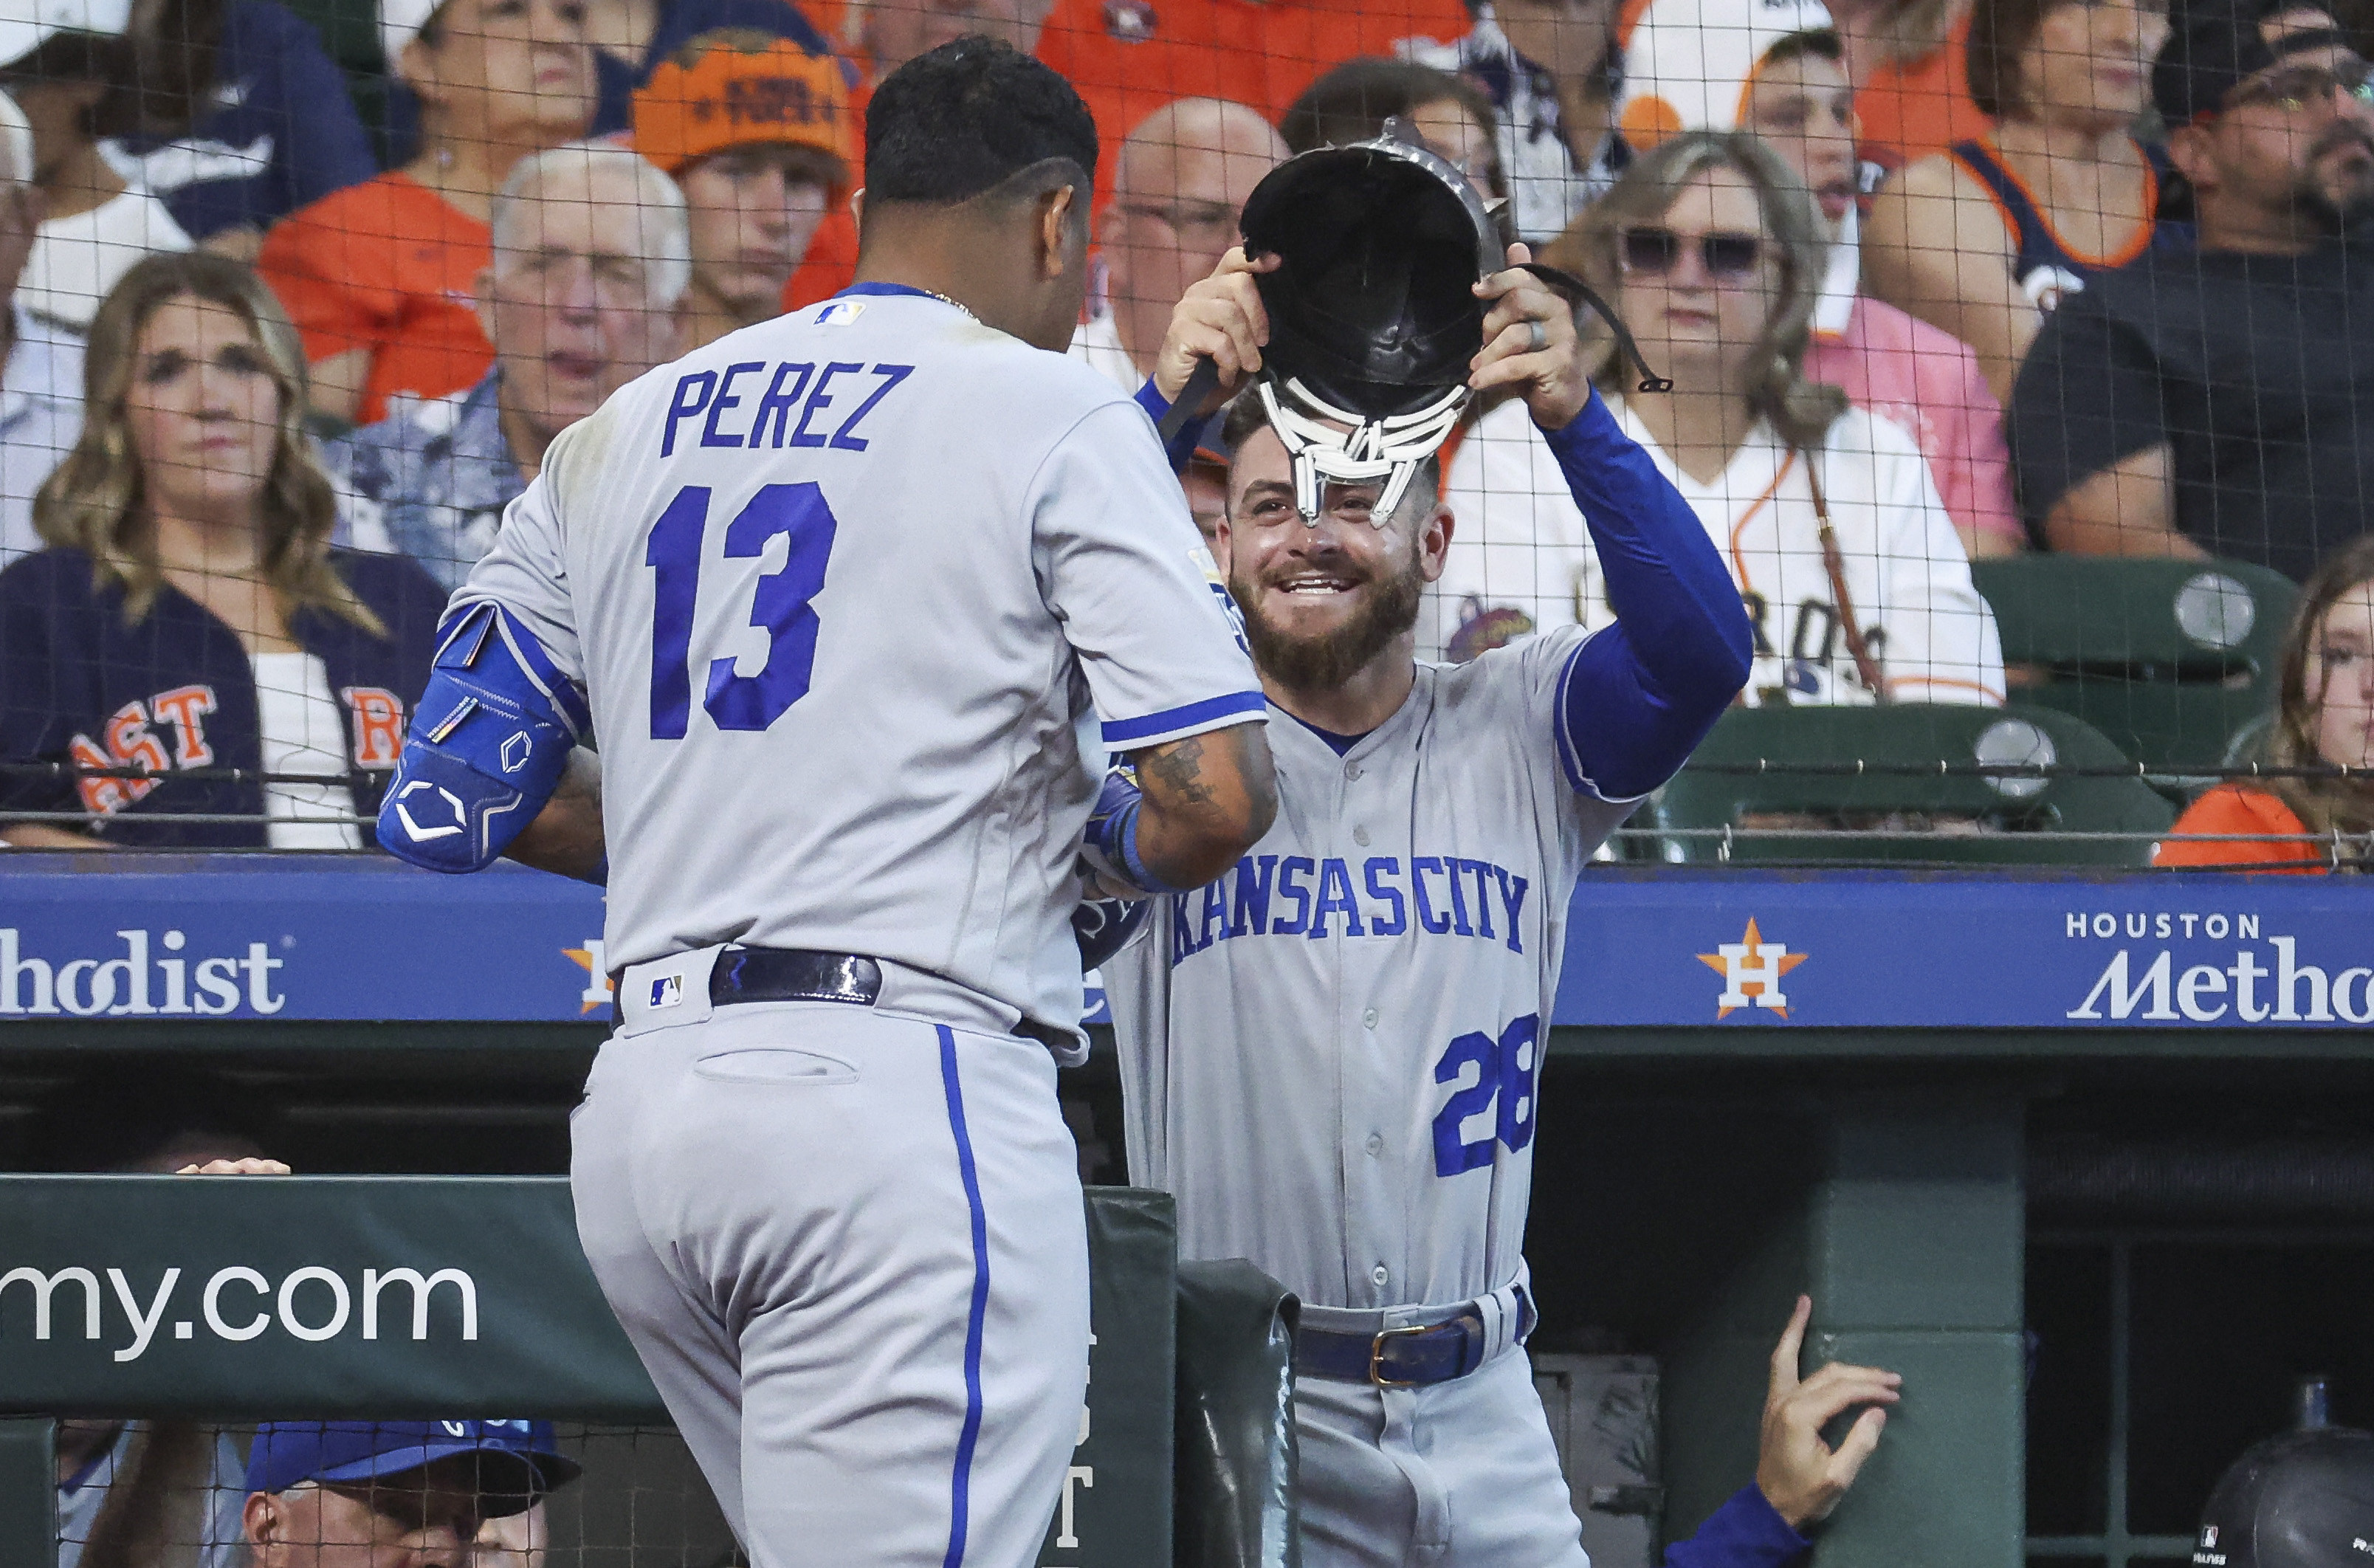 MLB roundup: Lowly Royals finish 3-game sweep of Astros